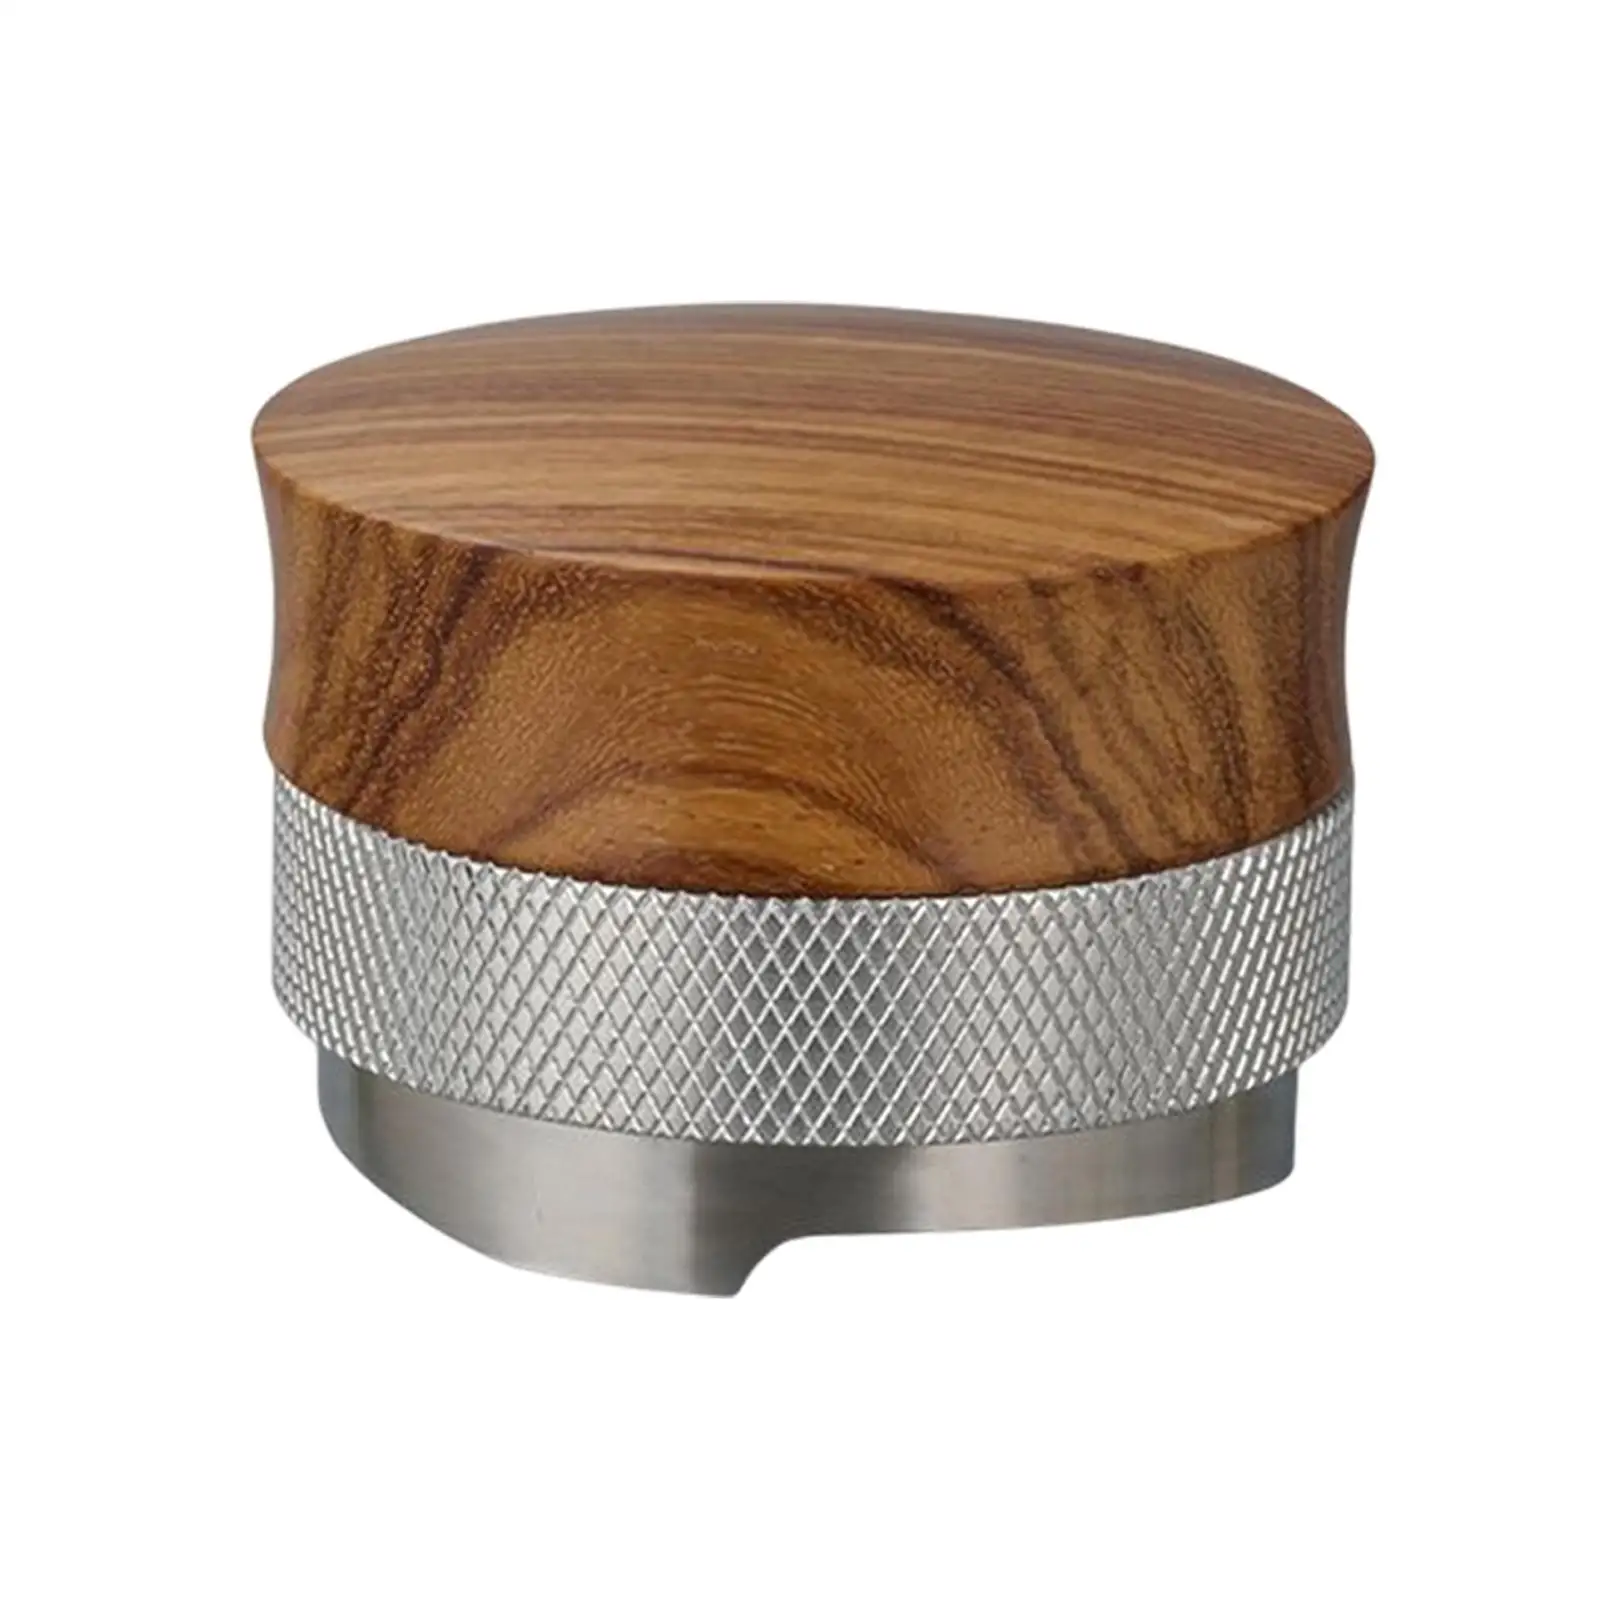 58mm Coffee Tamper Coffee Tool Coffee Distributor and Tamper for Home Bar